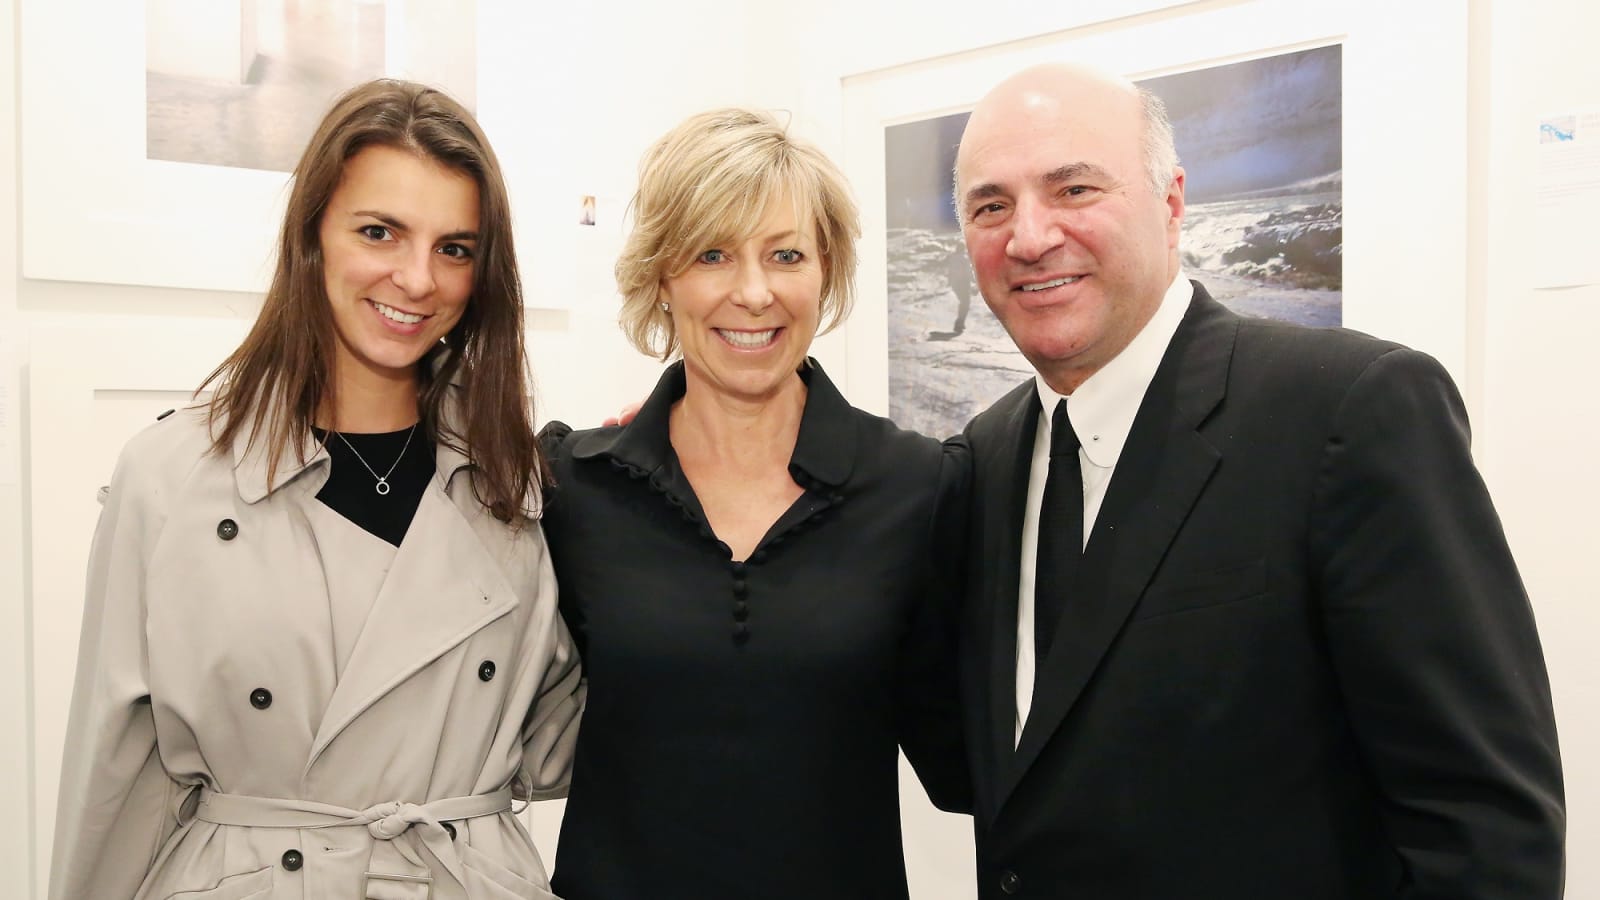 Advice Shark Tank S Kevin O Leary Gave His Daughter On Job Hunting